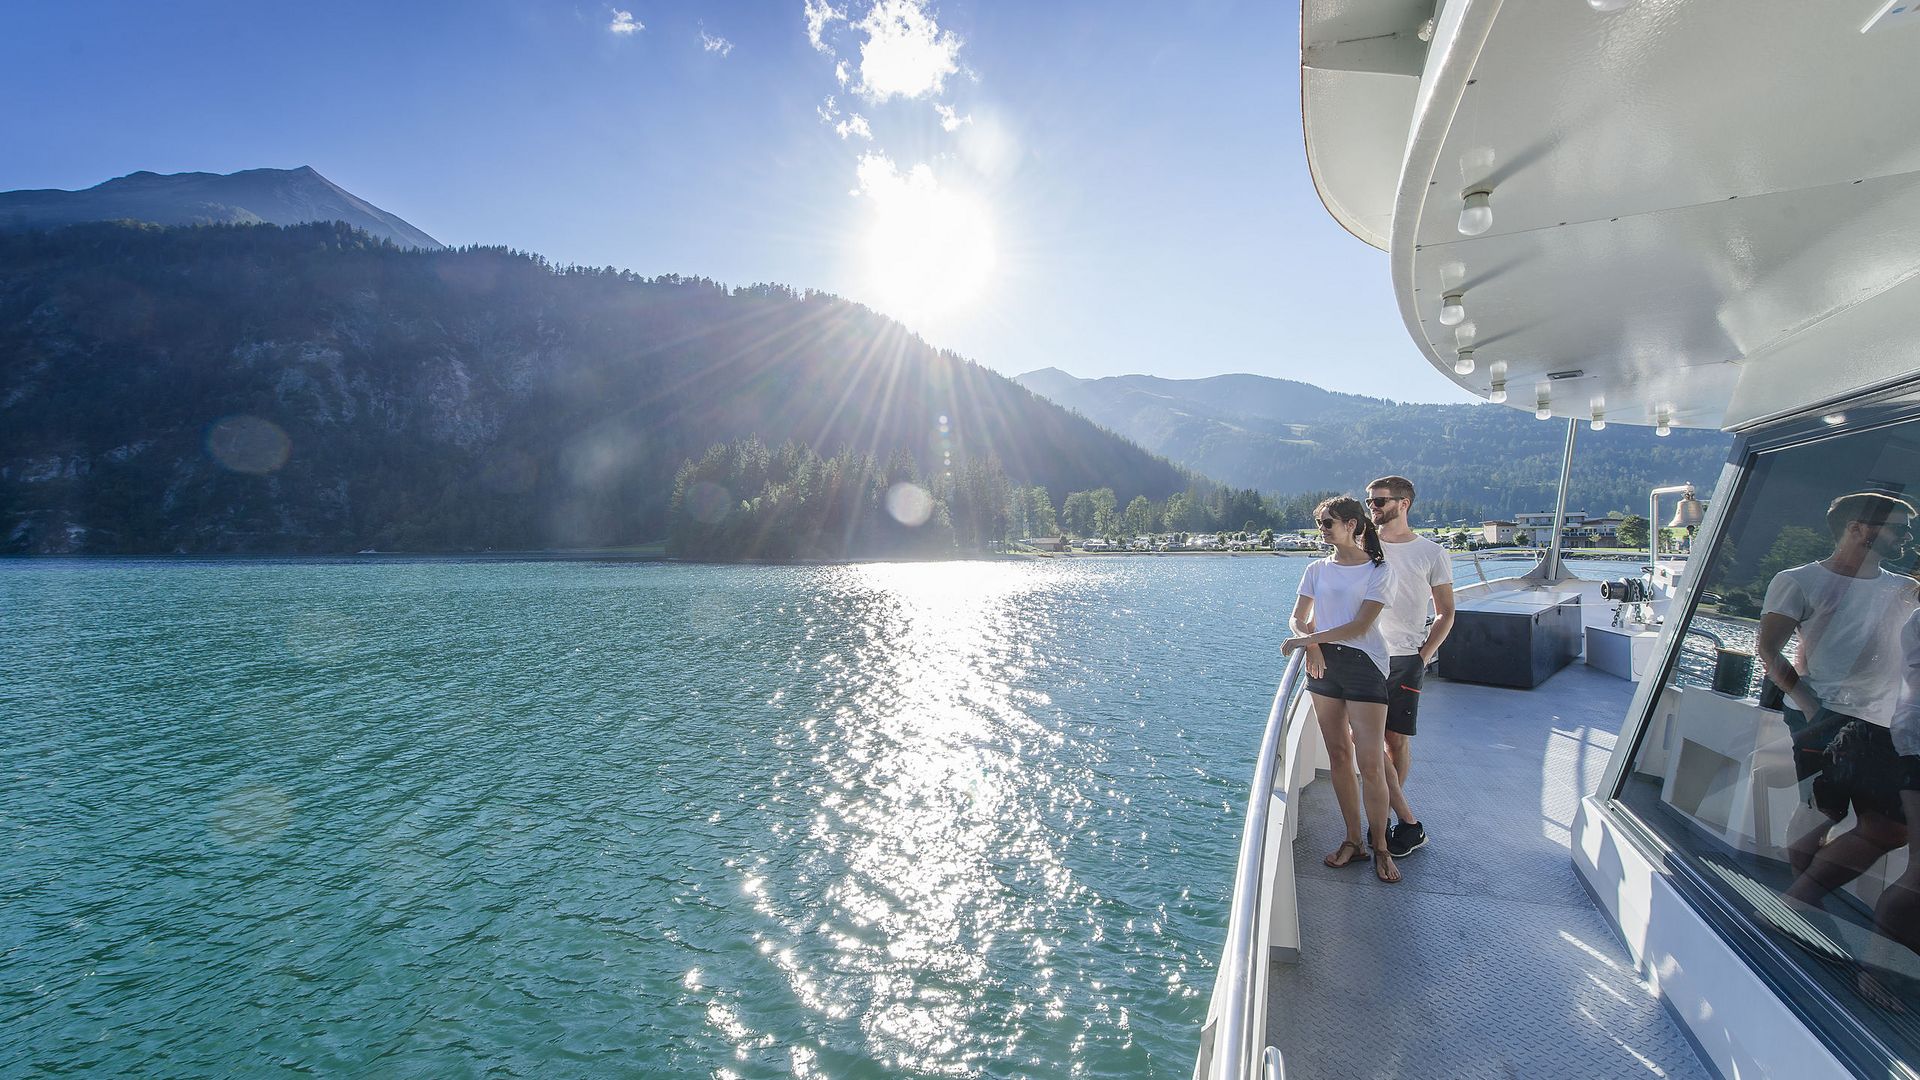 With a ship on Lake Achensee 